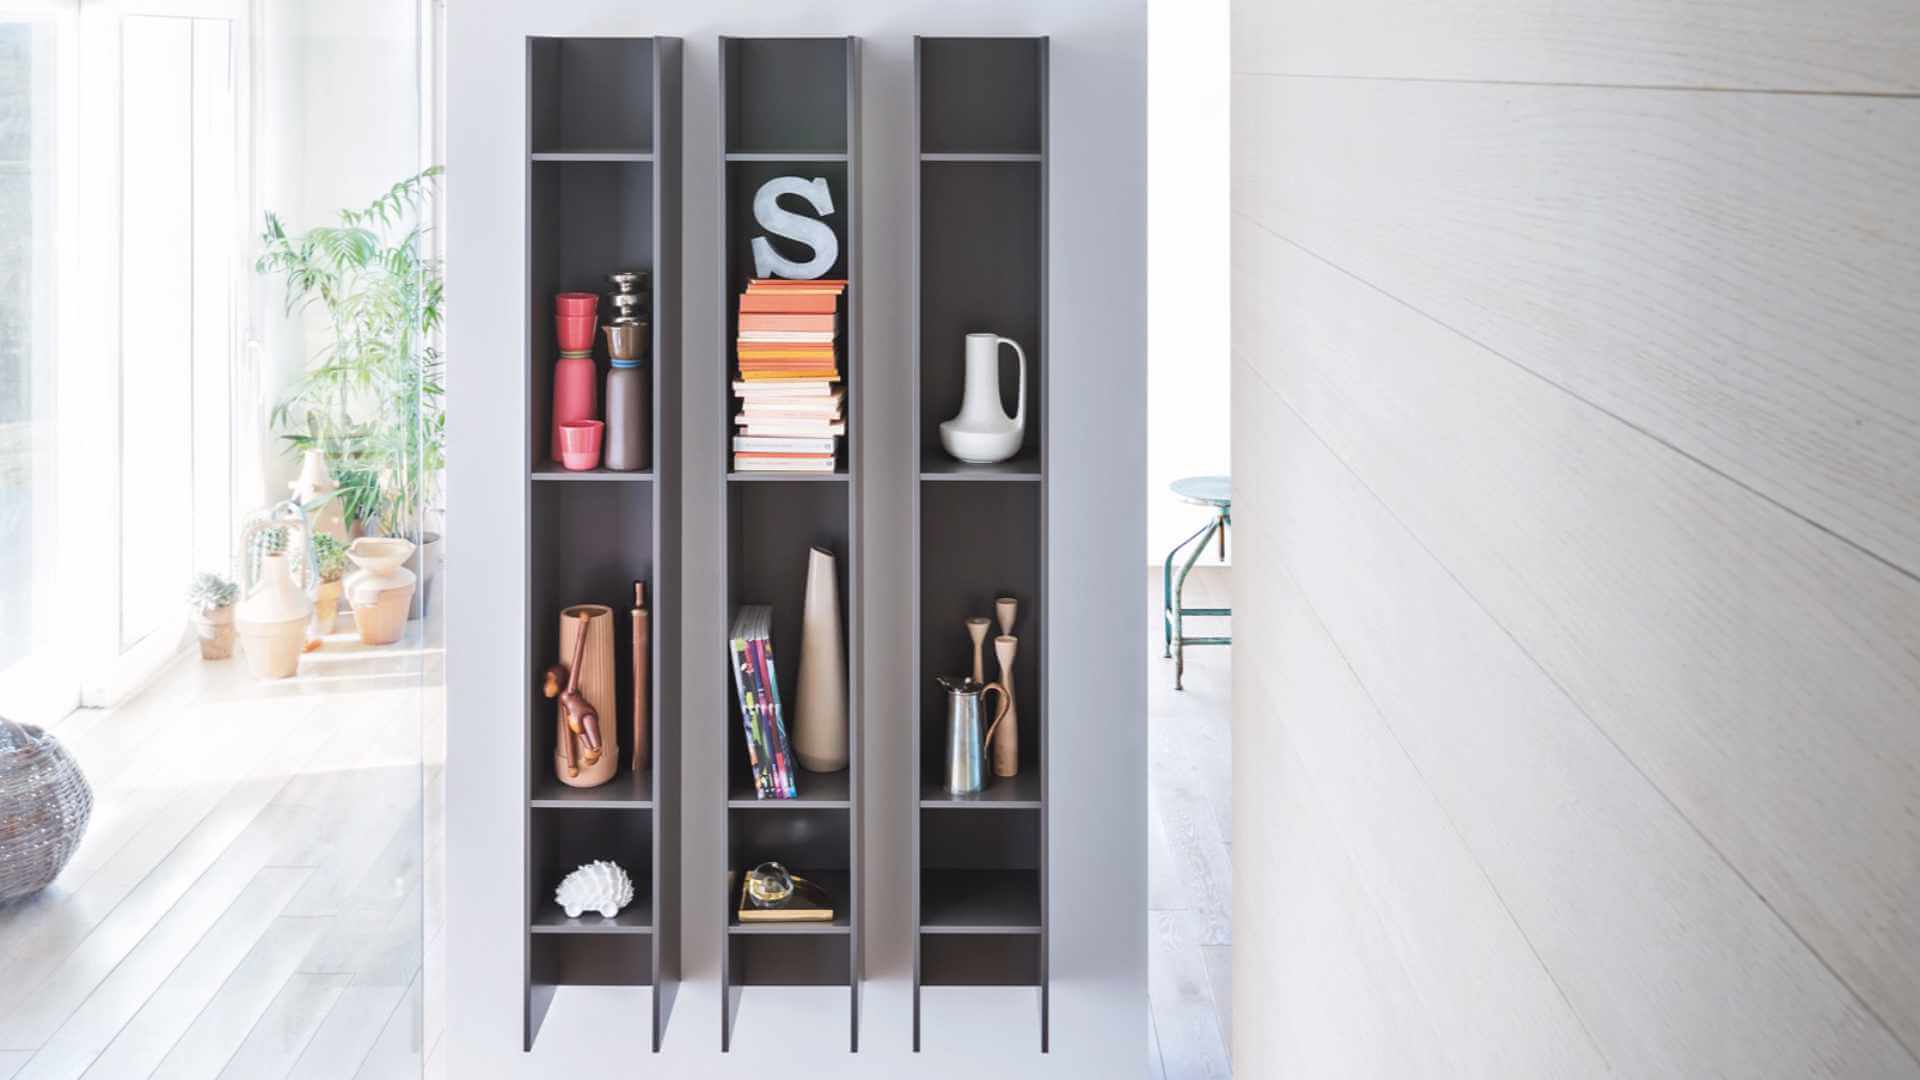 Blog IDW - How to choose bookshelves: proposals from Novamobili